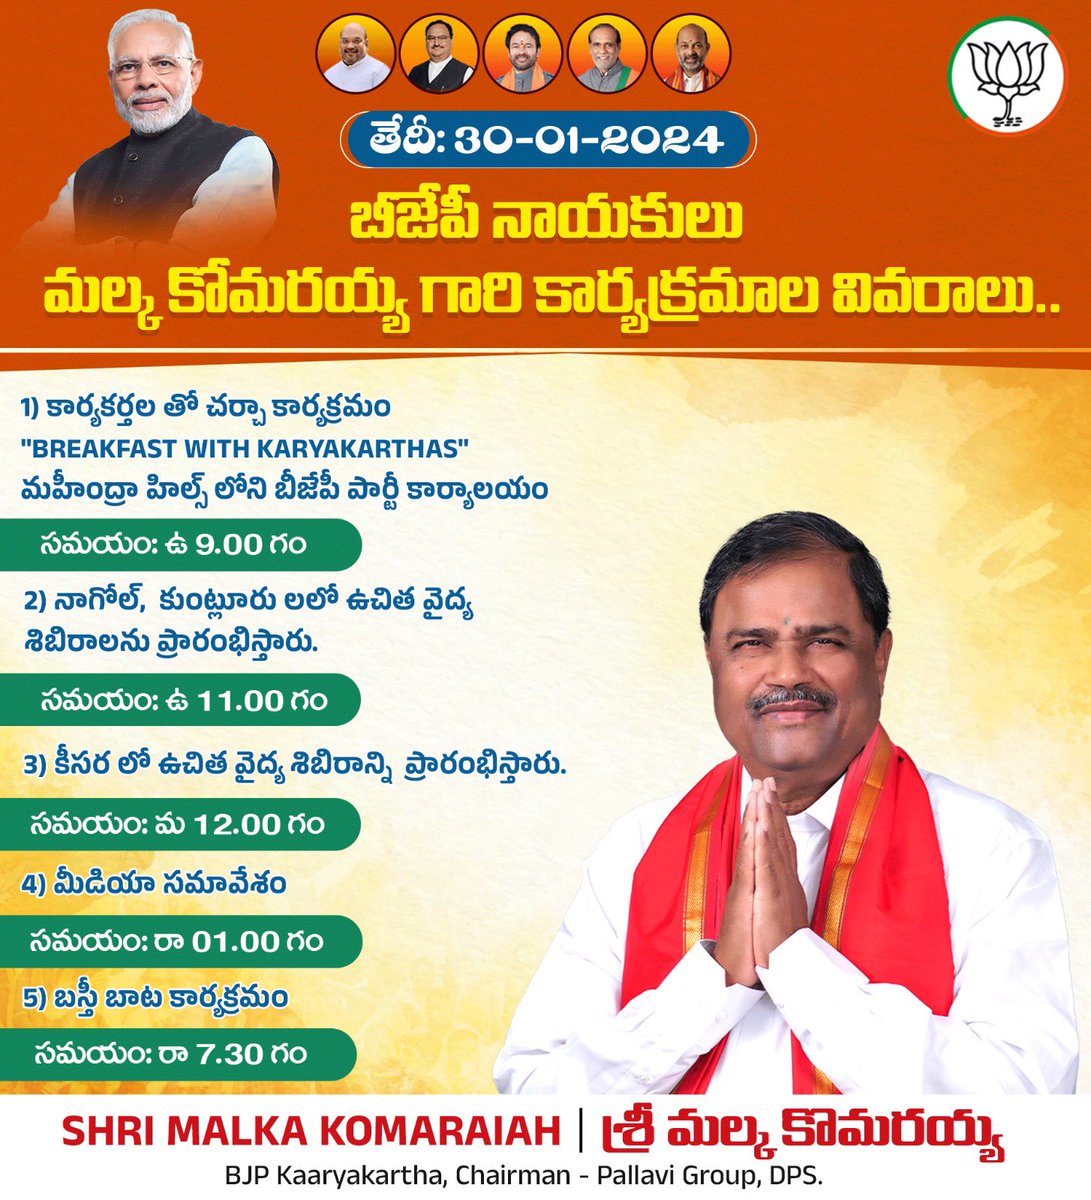 Schedule for tomorrow - 30/01/2024.

- Breakfast with party cadre at BJP office, Mahindra hills.
⏰ 9:00 AM

- Will inaugurate free medical camp at Nagole & Kuntlooru.
⏰ 11:00 AM

- Will inaugurate free medical camp at Keesara.
⏰ 12:00 PM

- Will address the Press from Mahindra